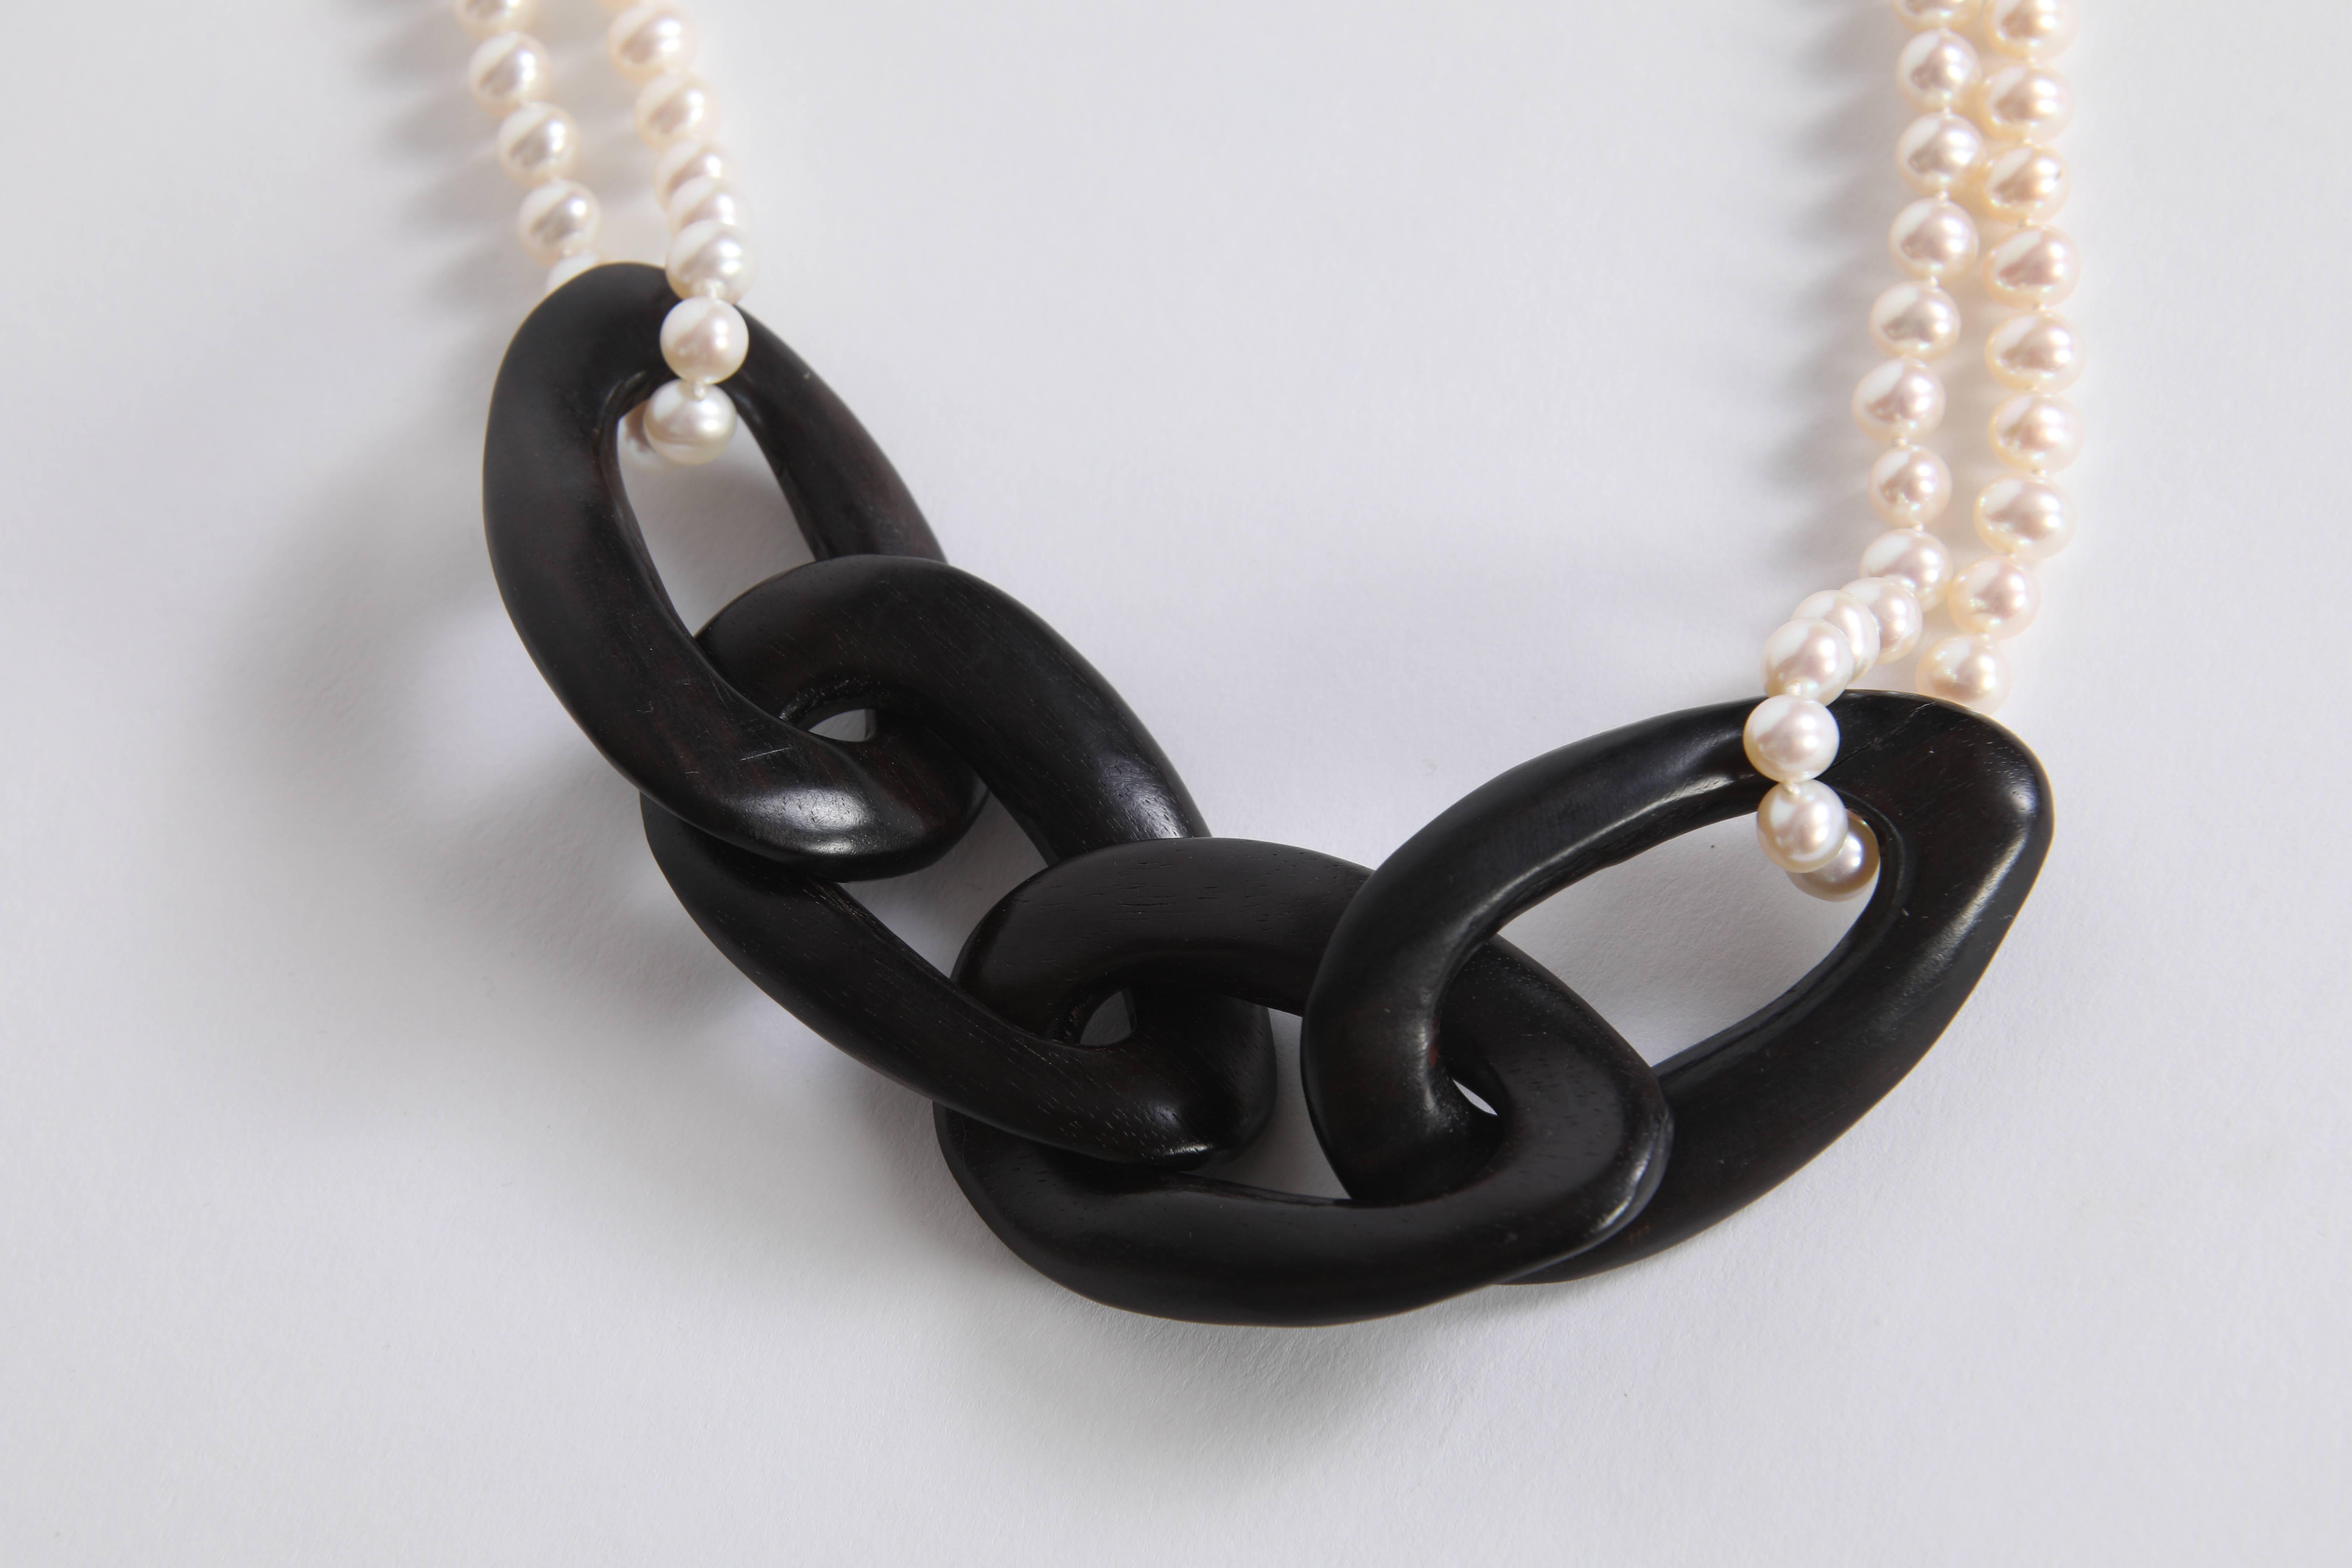 Ebony Wood and Freshwater Pearls Sautoir by Marion Jeantet 1